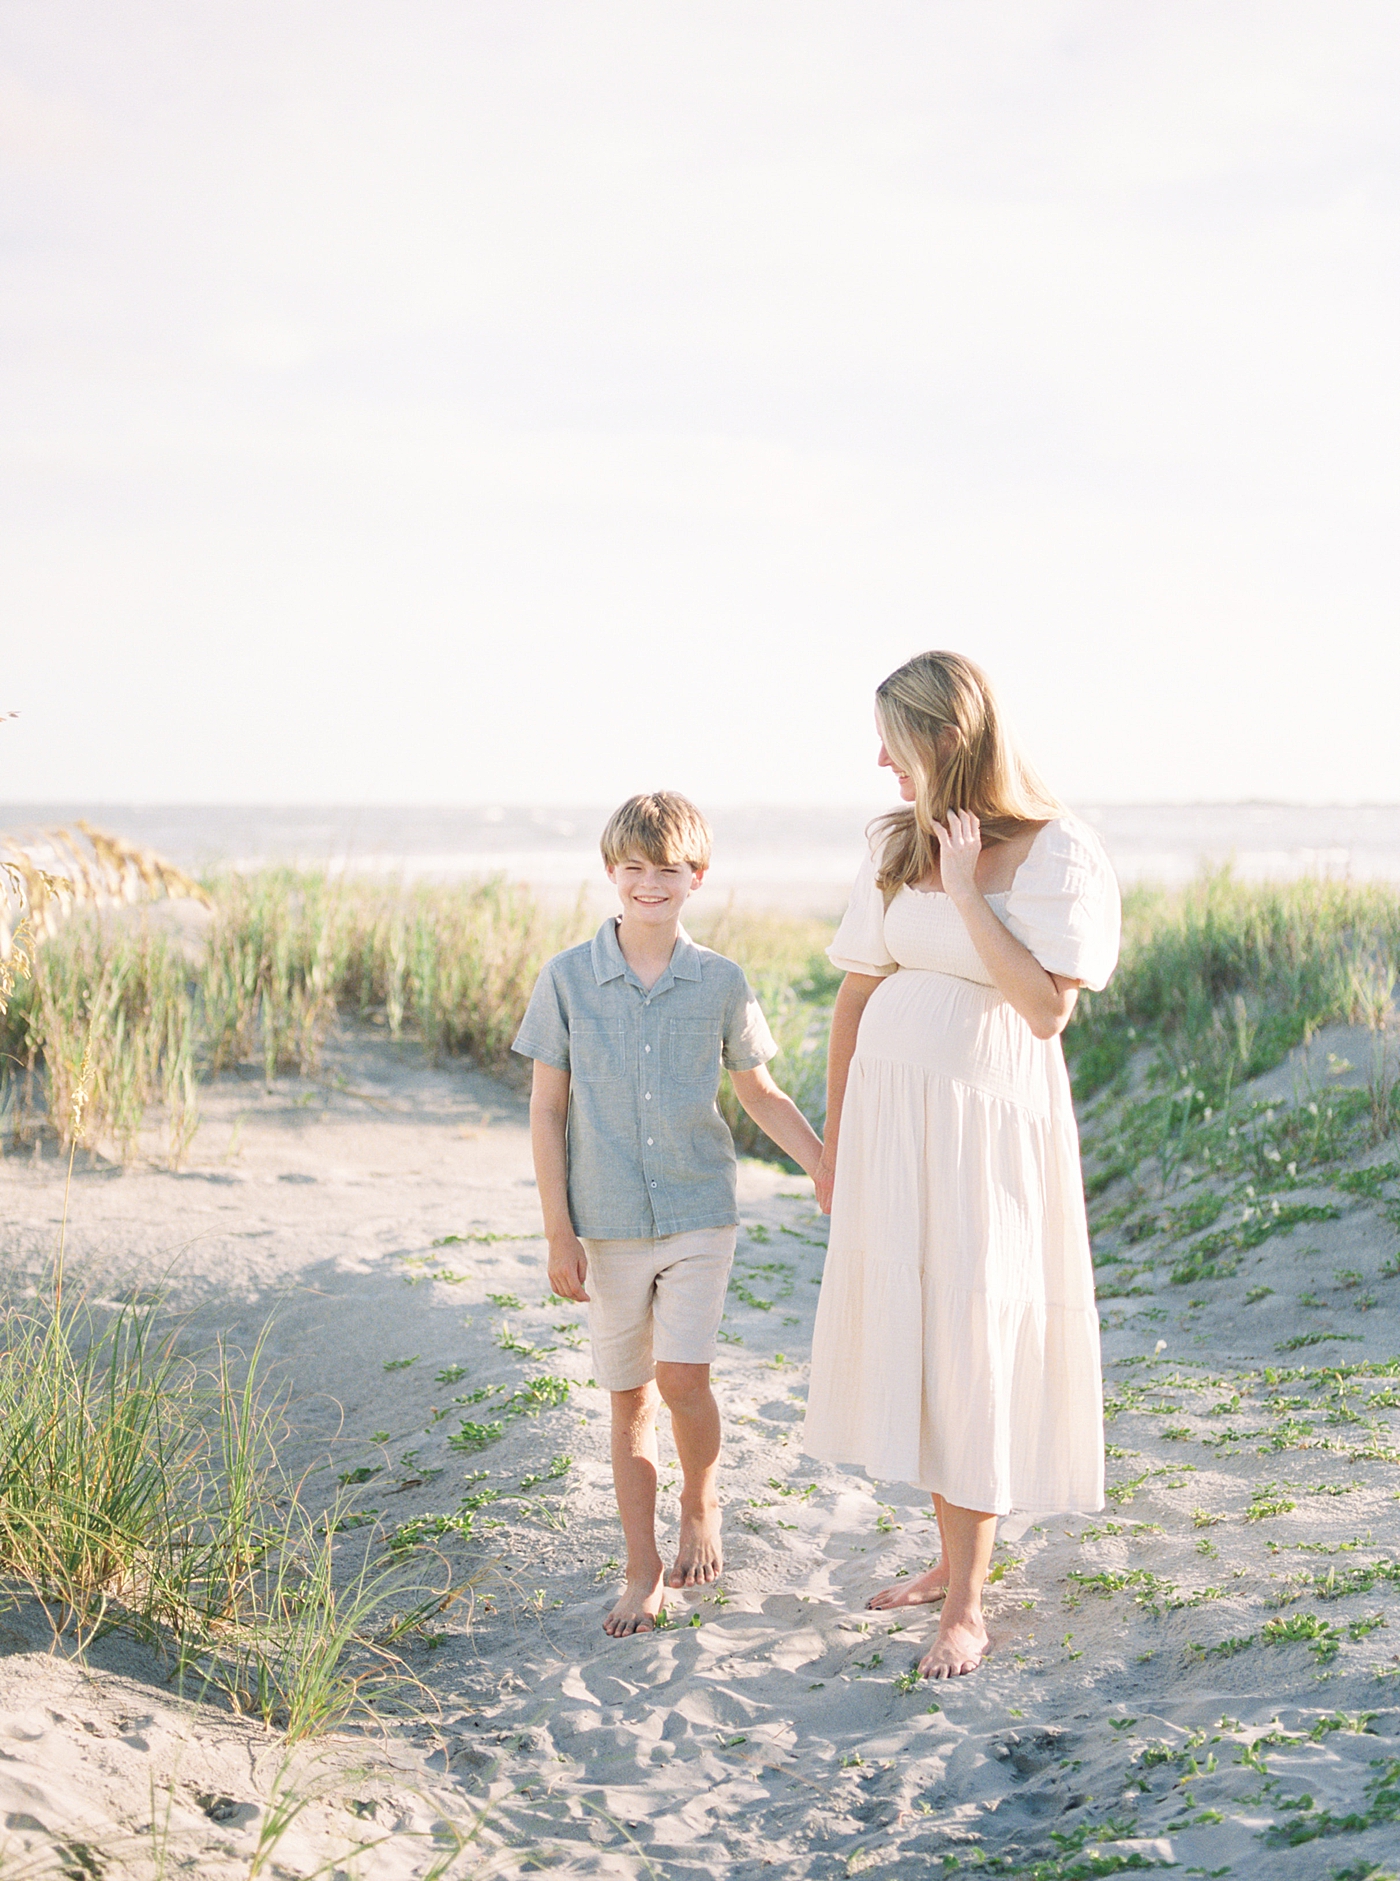 Mom and little boy holding hands on the beach during their Maternity Session at Folly Beach | Image by Caitlyn Motycka